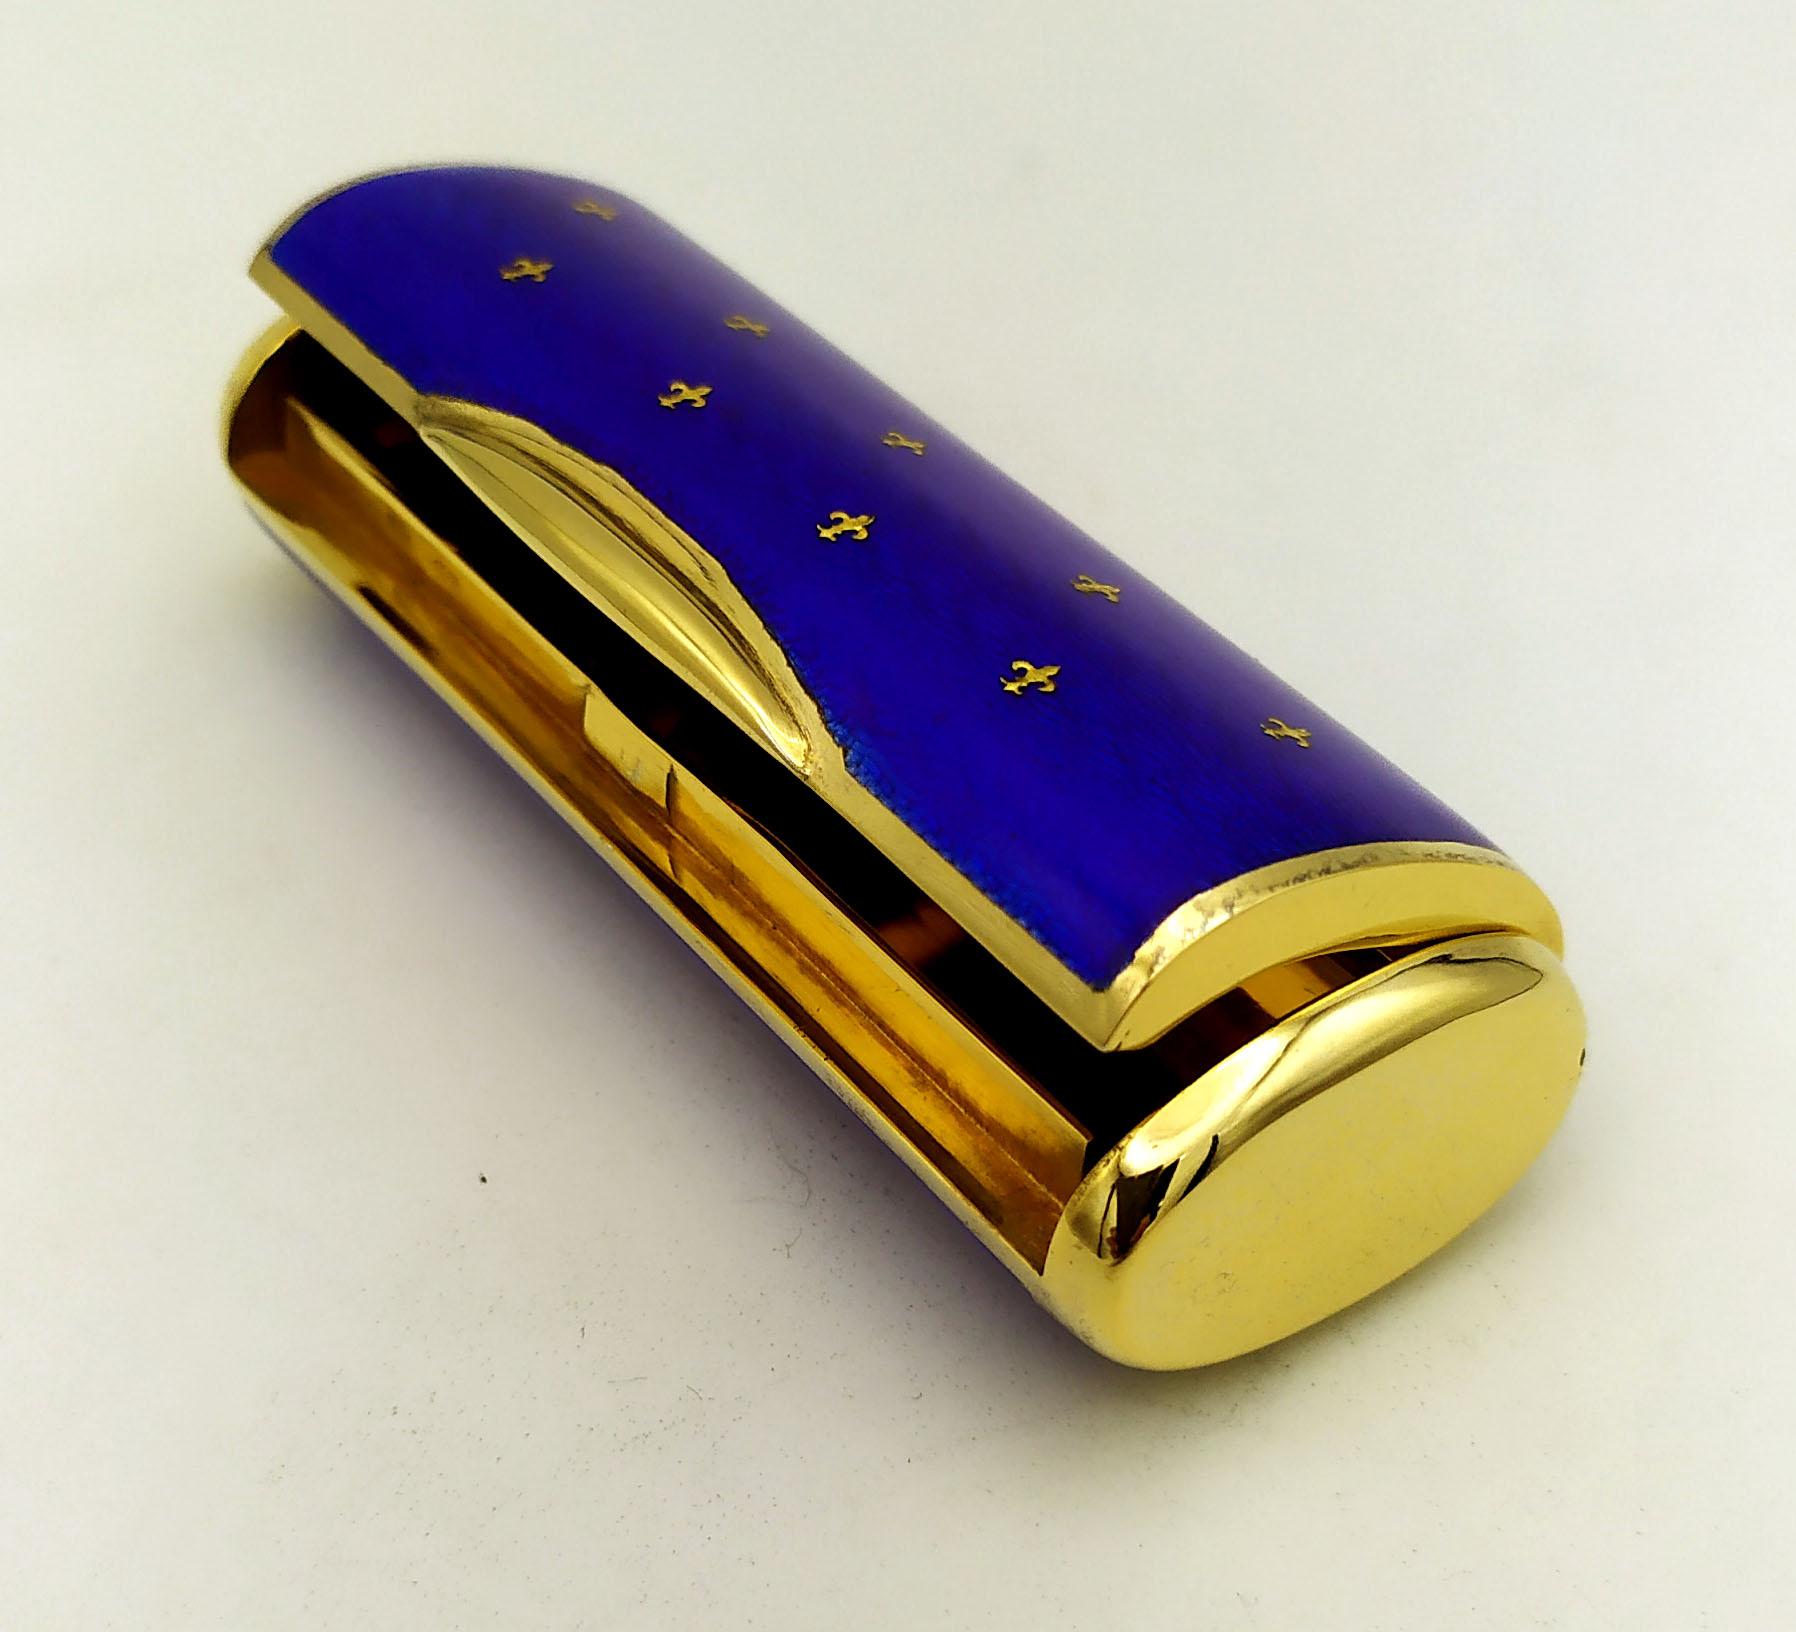 Rectangular oval shape pocket snuffbox in 925/1000 sterling silver gold plated with translucent blue fired enamel on guillochè and with the insertion of pure gold 